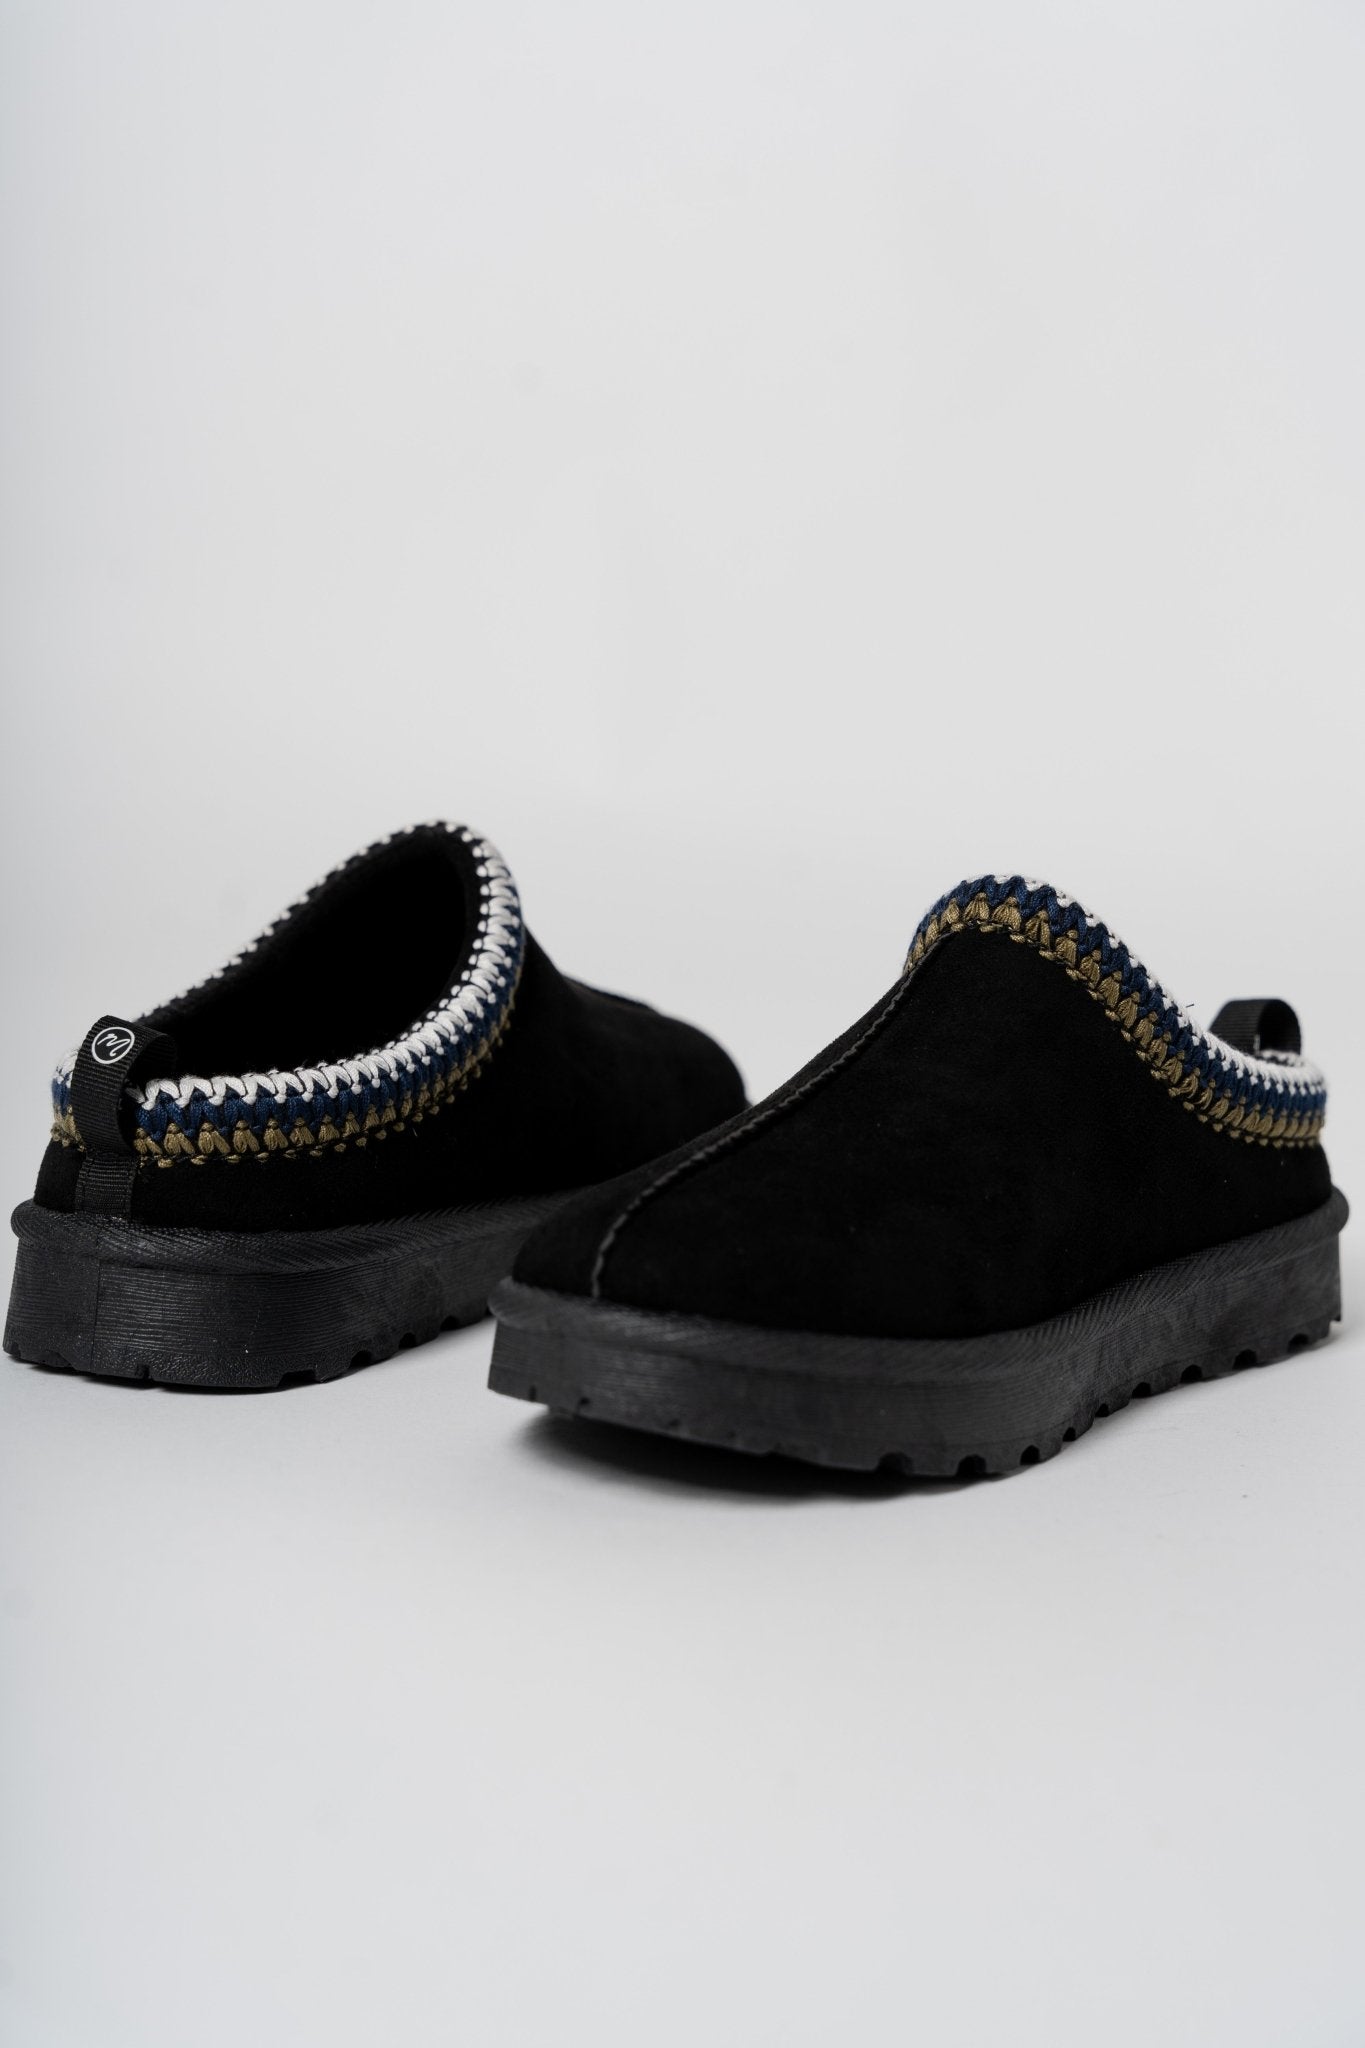 Zen stitched slippers black Stylish shoes - Womens Fashion Shoes at Lush Fashion Lounge Boutique in Oklahoma City